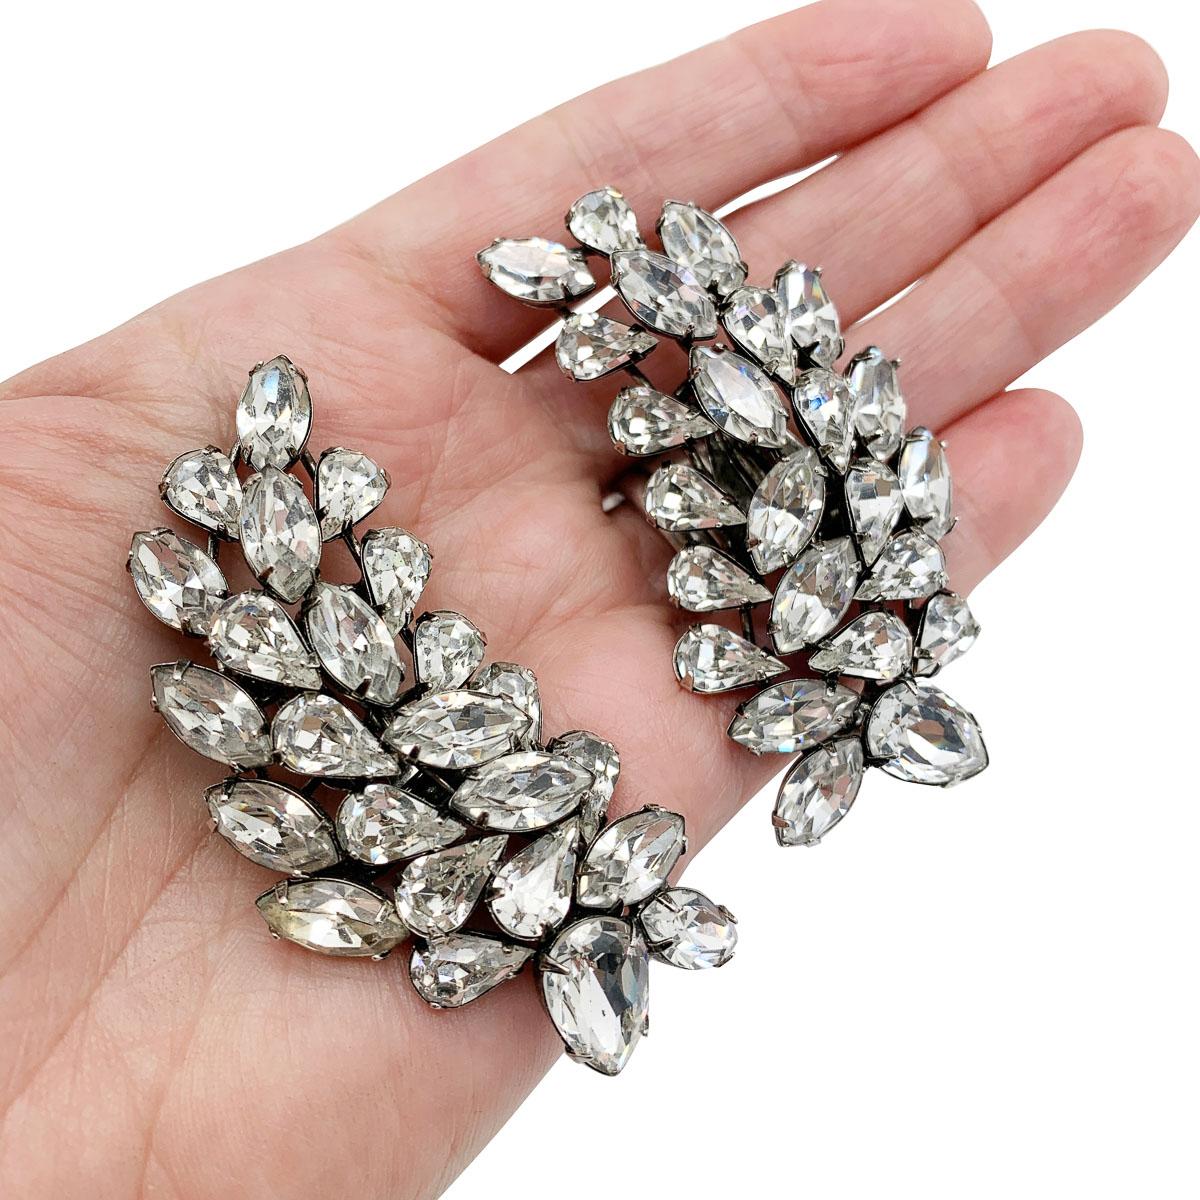 The most spectacular pair of Vintage Iradj Moini Ear climbers. Boasting a huge array of large fancy stones in pear and marquise cuts framing the face to perfection with their huge sweep. Each stone claw set.

Vintage Condition: Very good without